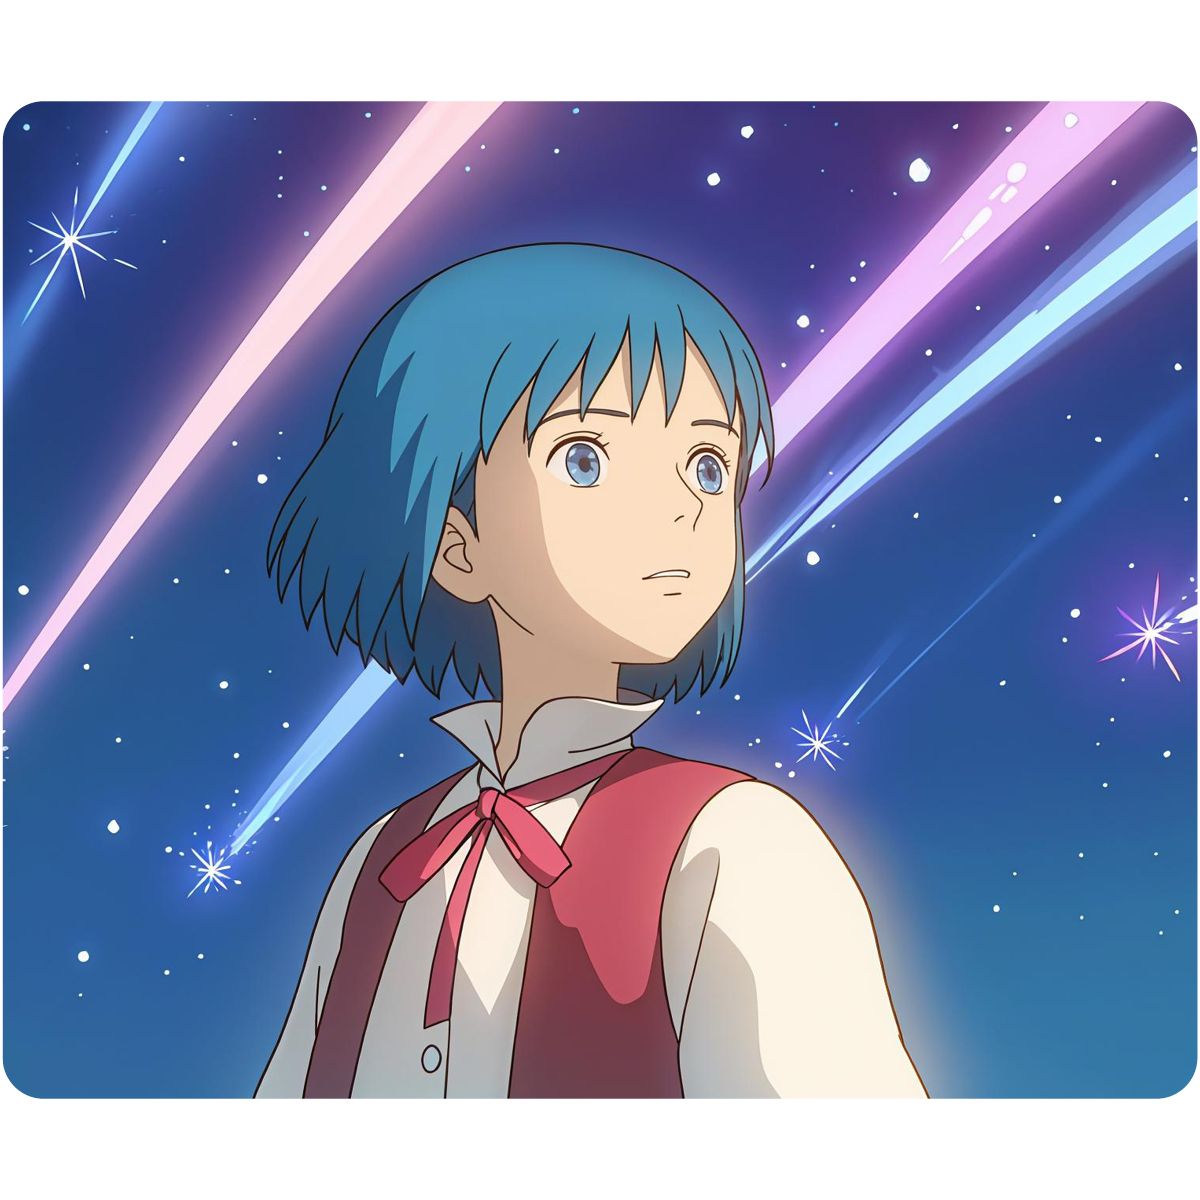 The image results after clicking on the ghibli_anime LORA card which will then append "<Lora:ghibli_anime_v1:1>" which is the trigger word to the positive prompt and generates this.